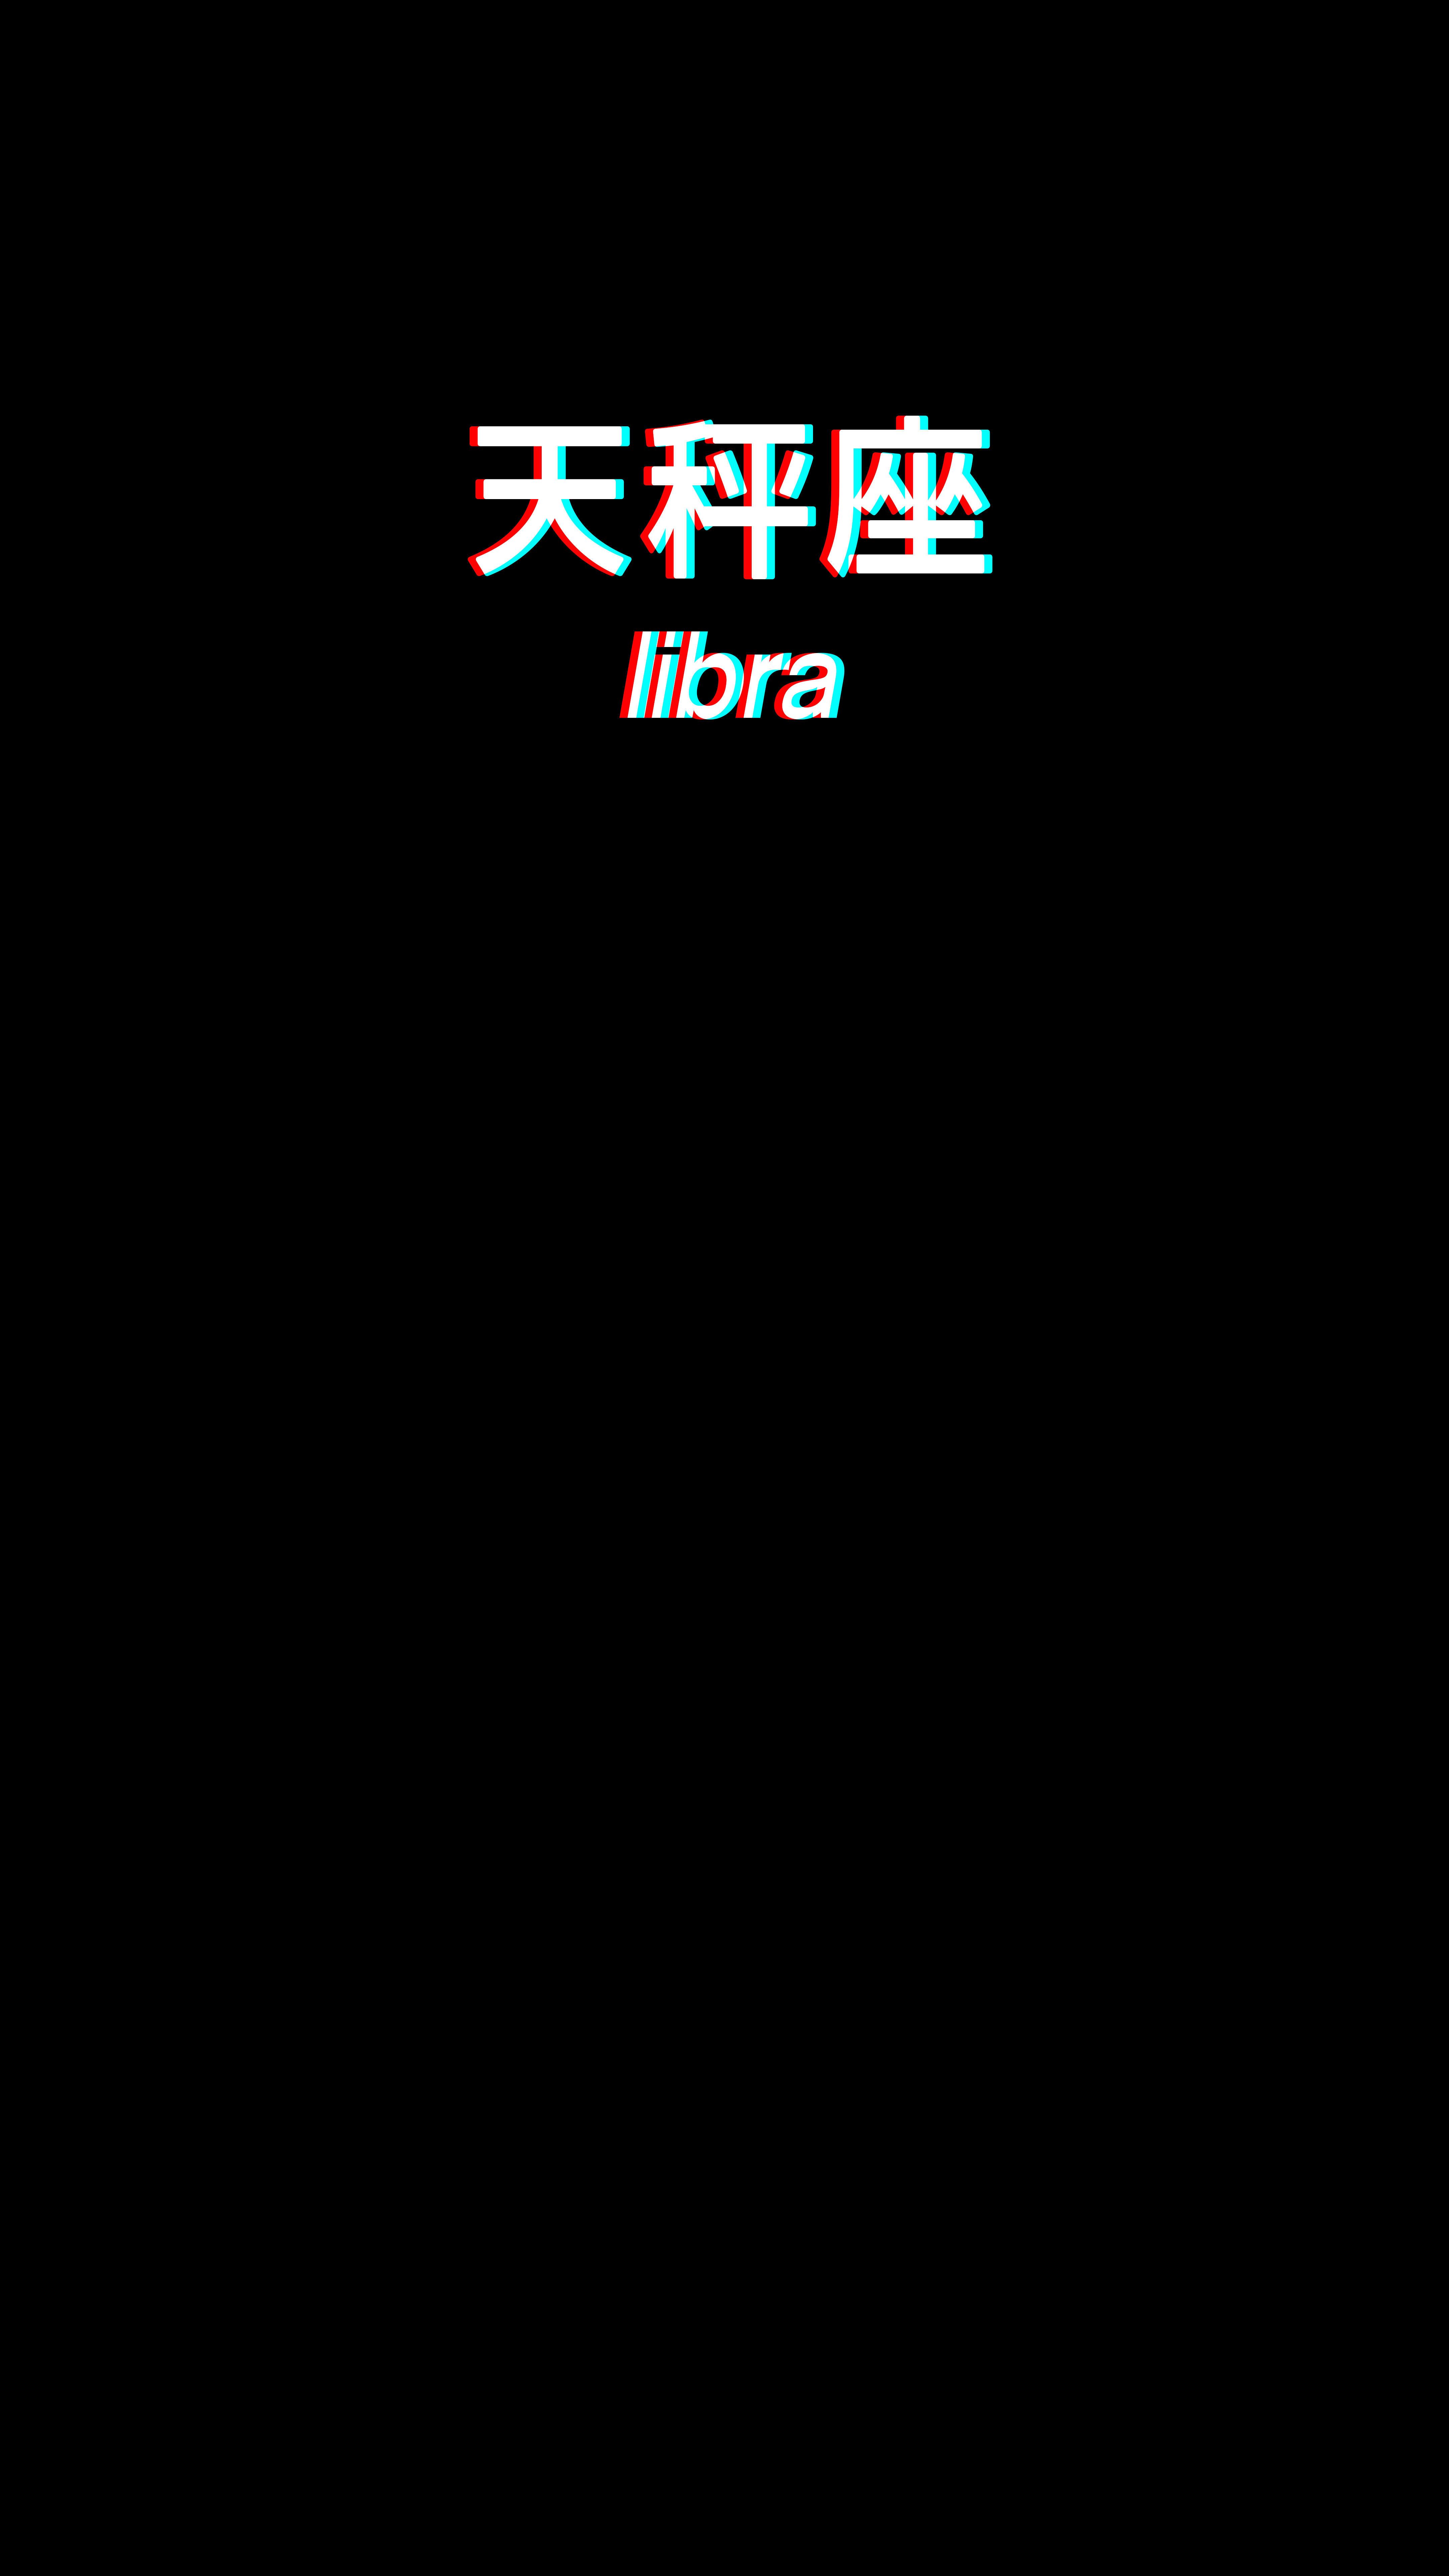 A black screen with the word ibara on it - Libra